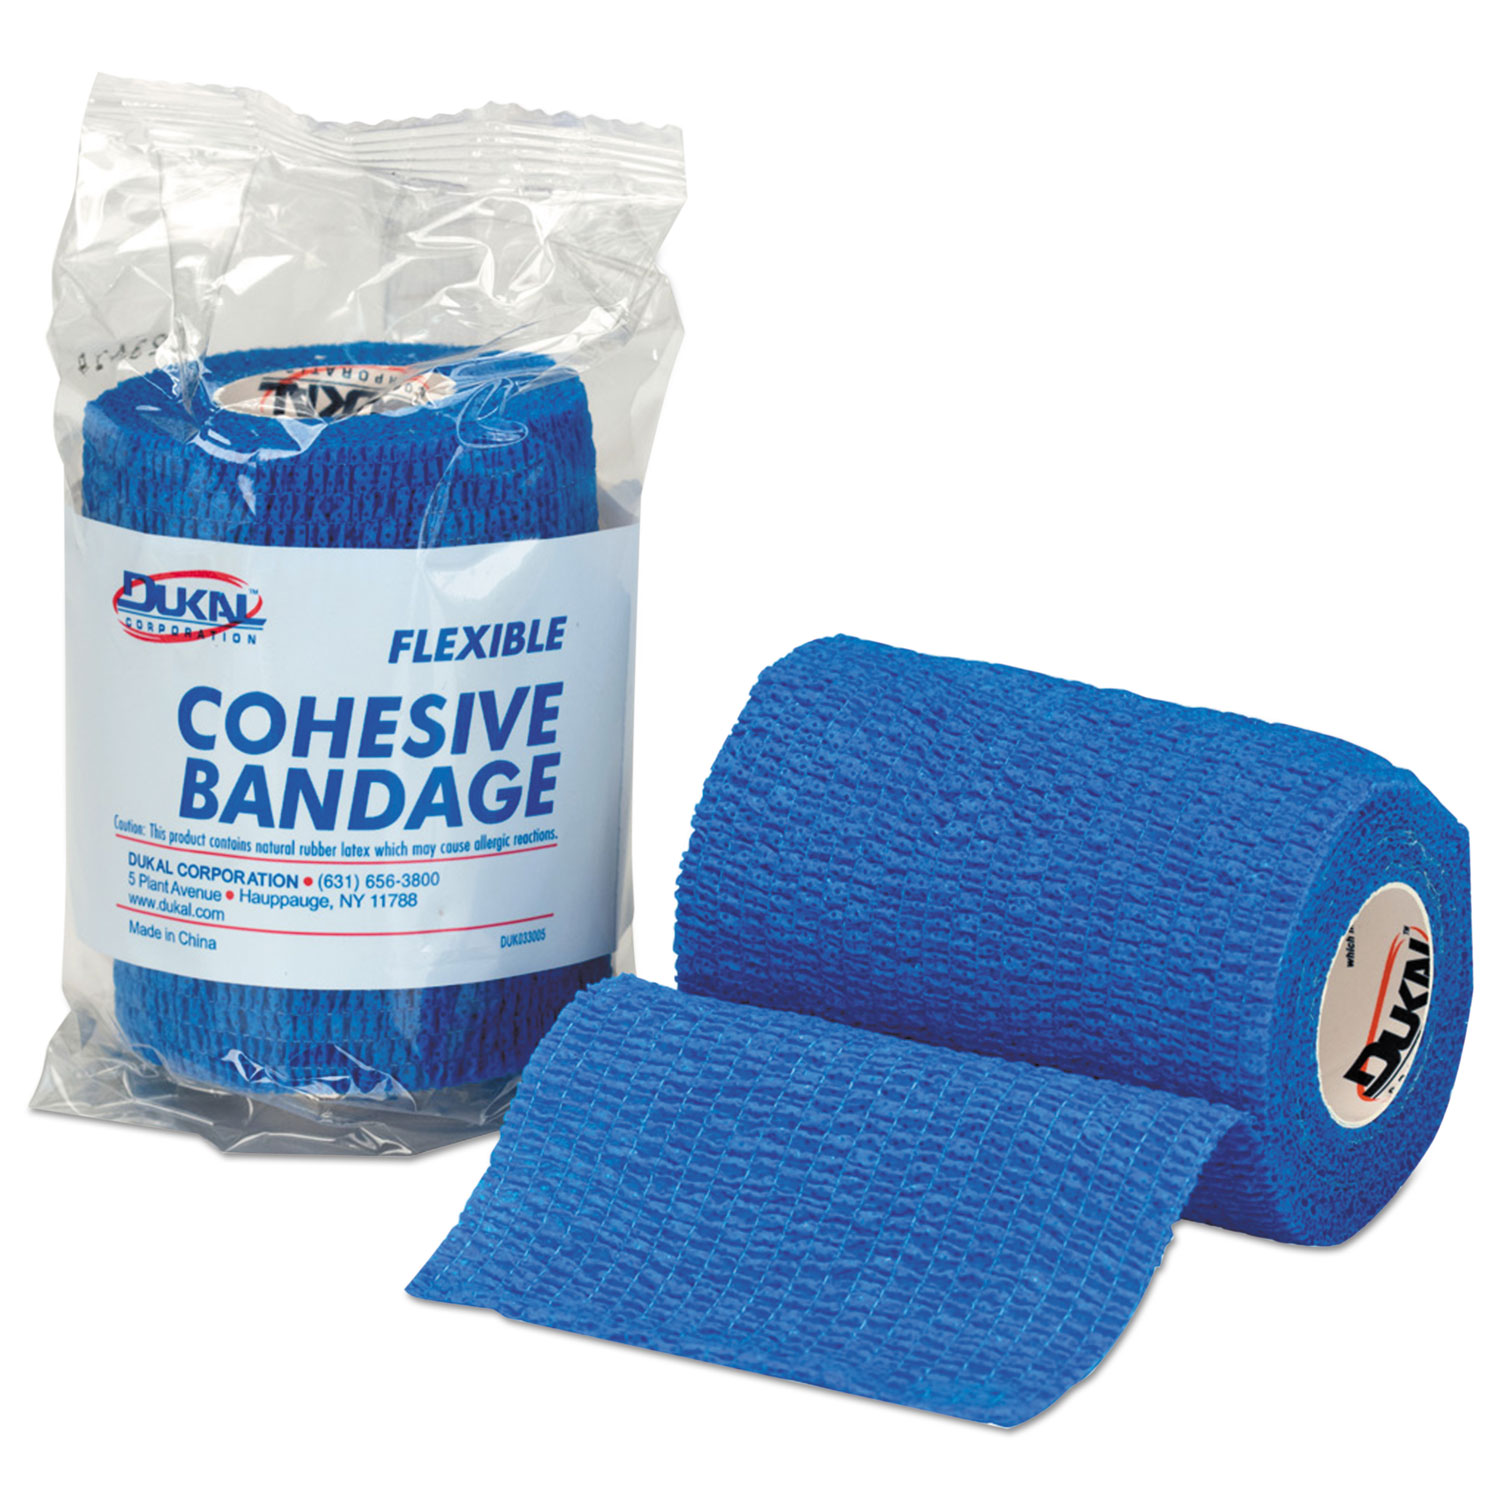 First-Aid Refill Flexible Cohesive Bandage Wrap, 3 x 5 yd, Blue